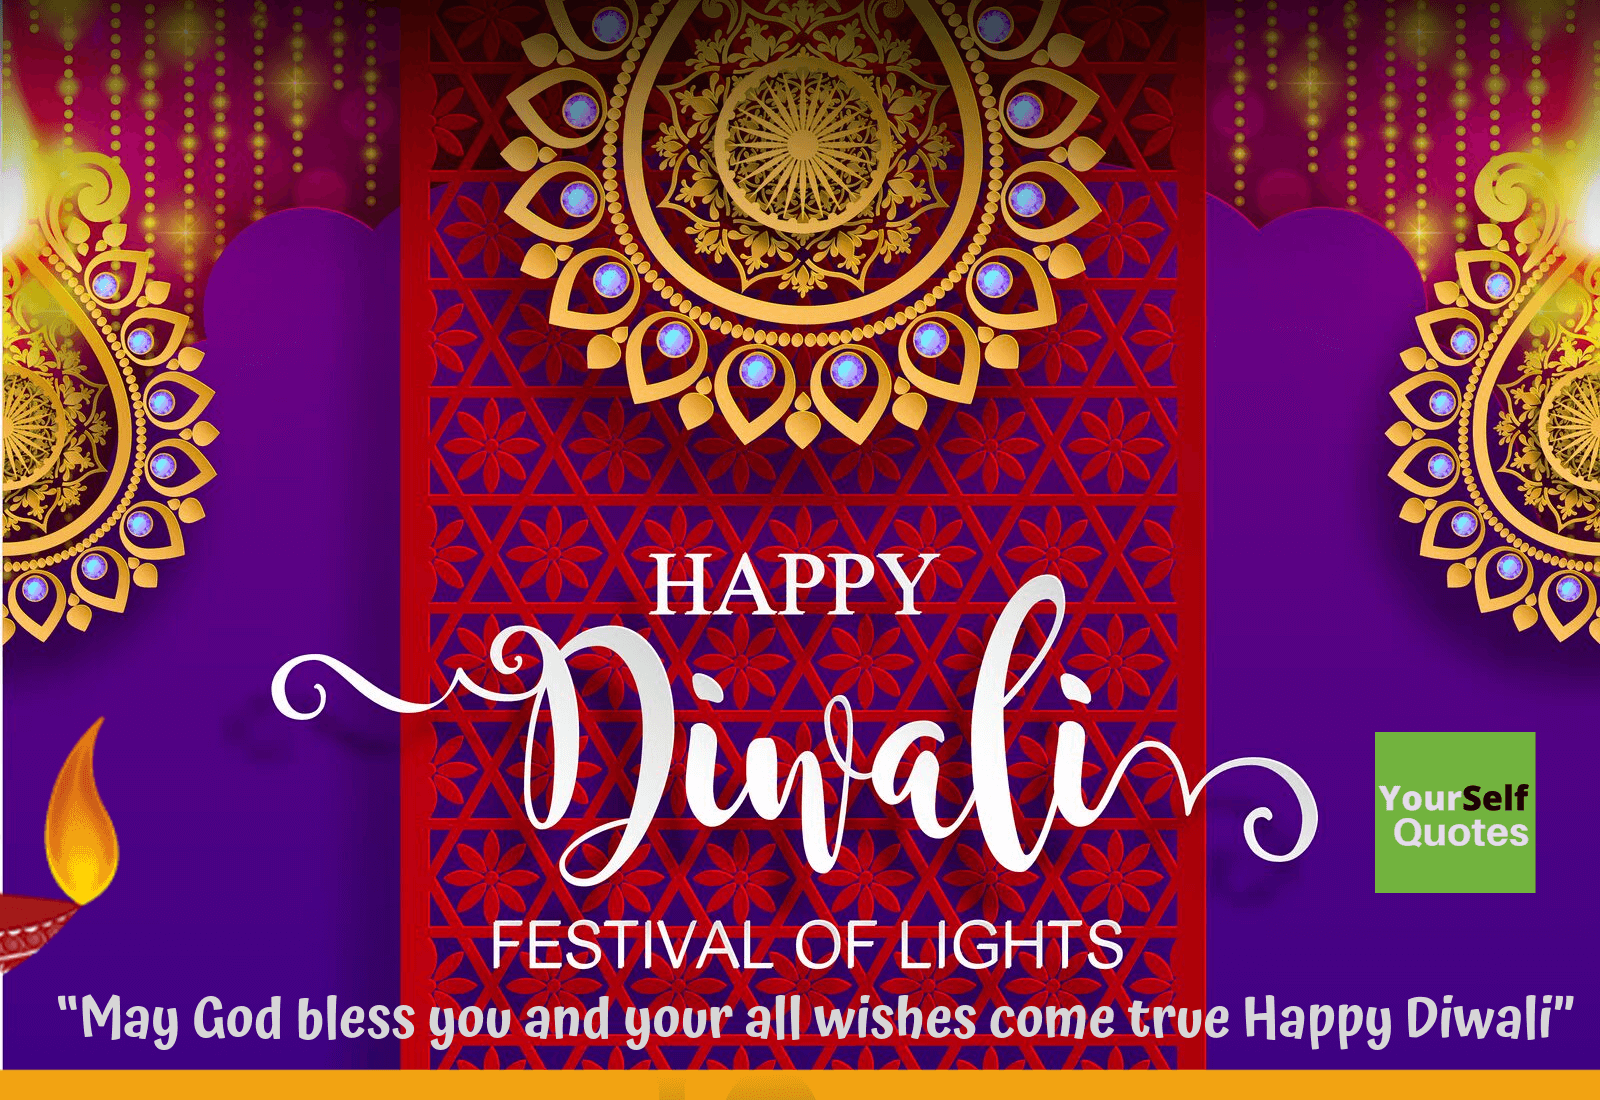 Happy Diwali Image For Family